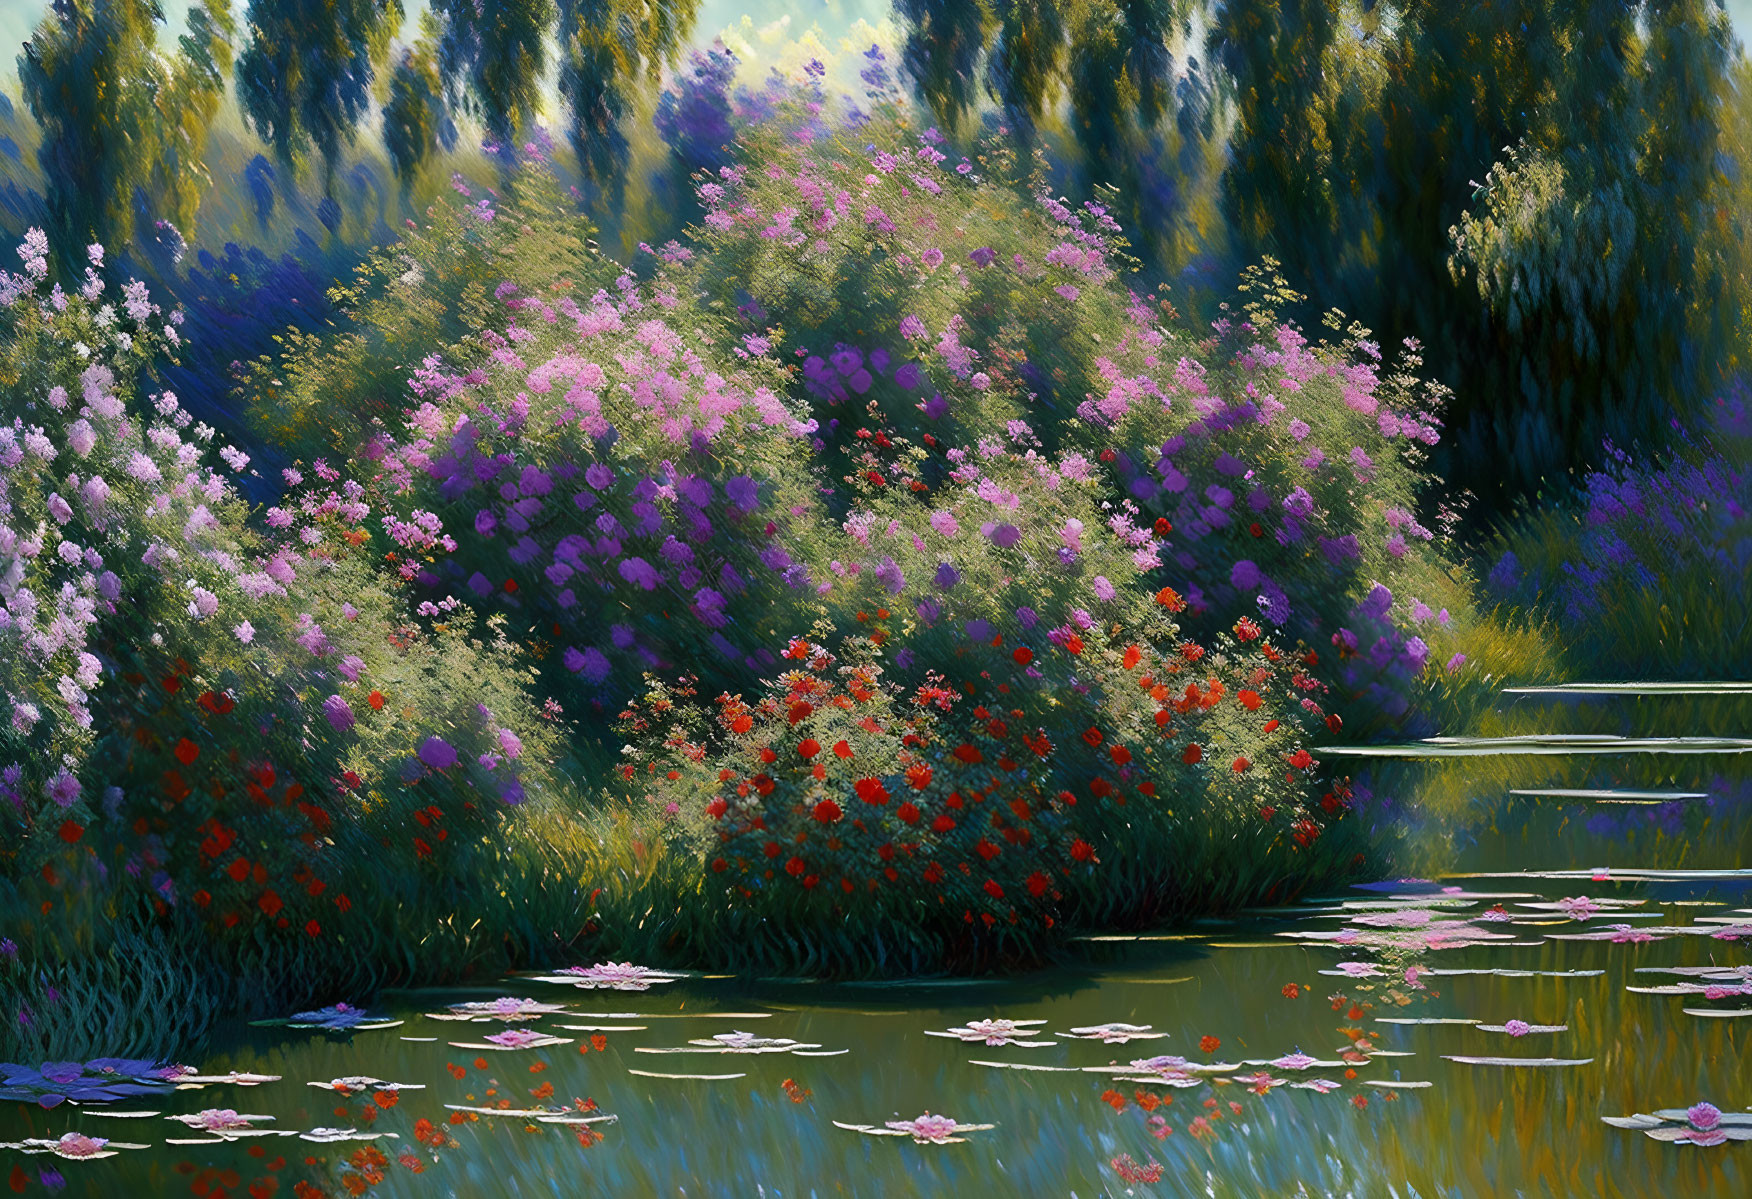 Lush Garden Scene with Blooming Flowers and Serene Pond